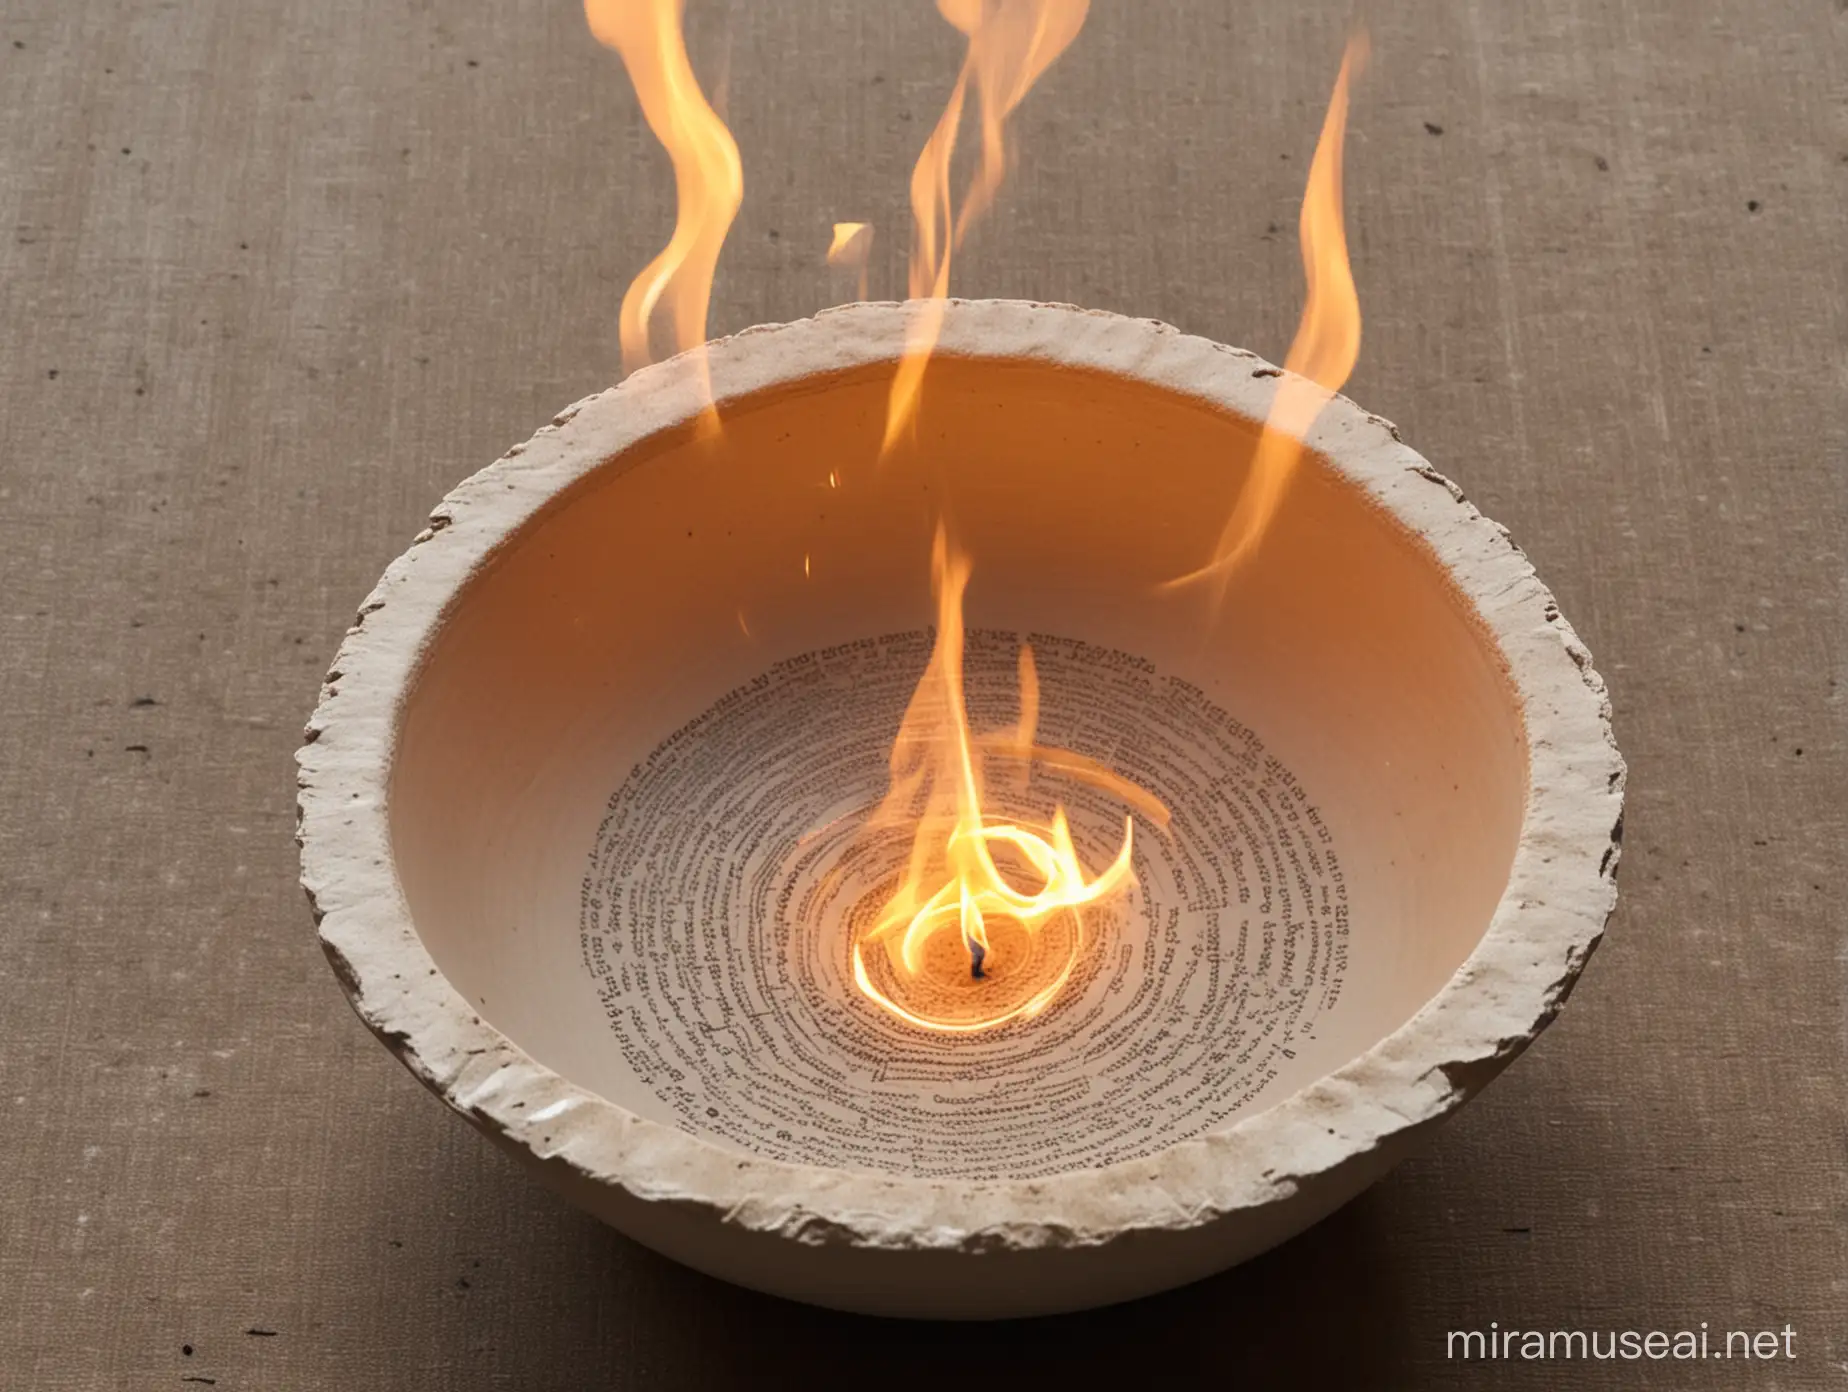 Guide students through a symbolic rebirth ritual where they write down their former self-limiting identities on a piece of paper, place it in a fireproof bowl and set it alight while declaring their new radiant self-concept out loud. 
